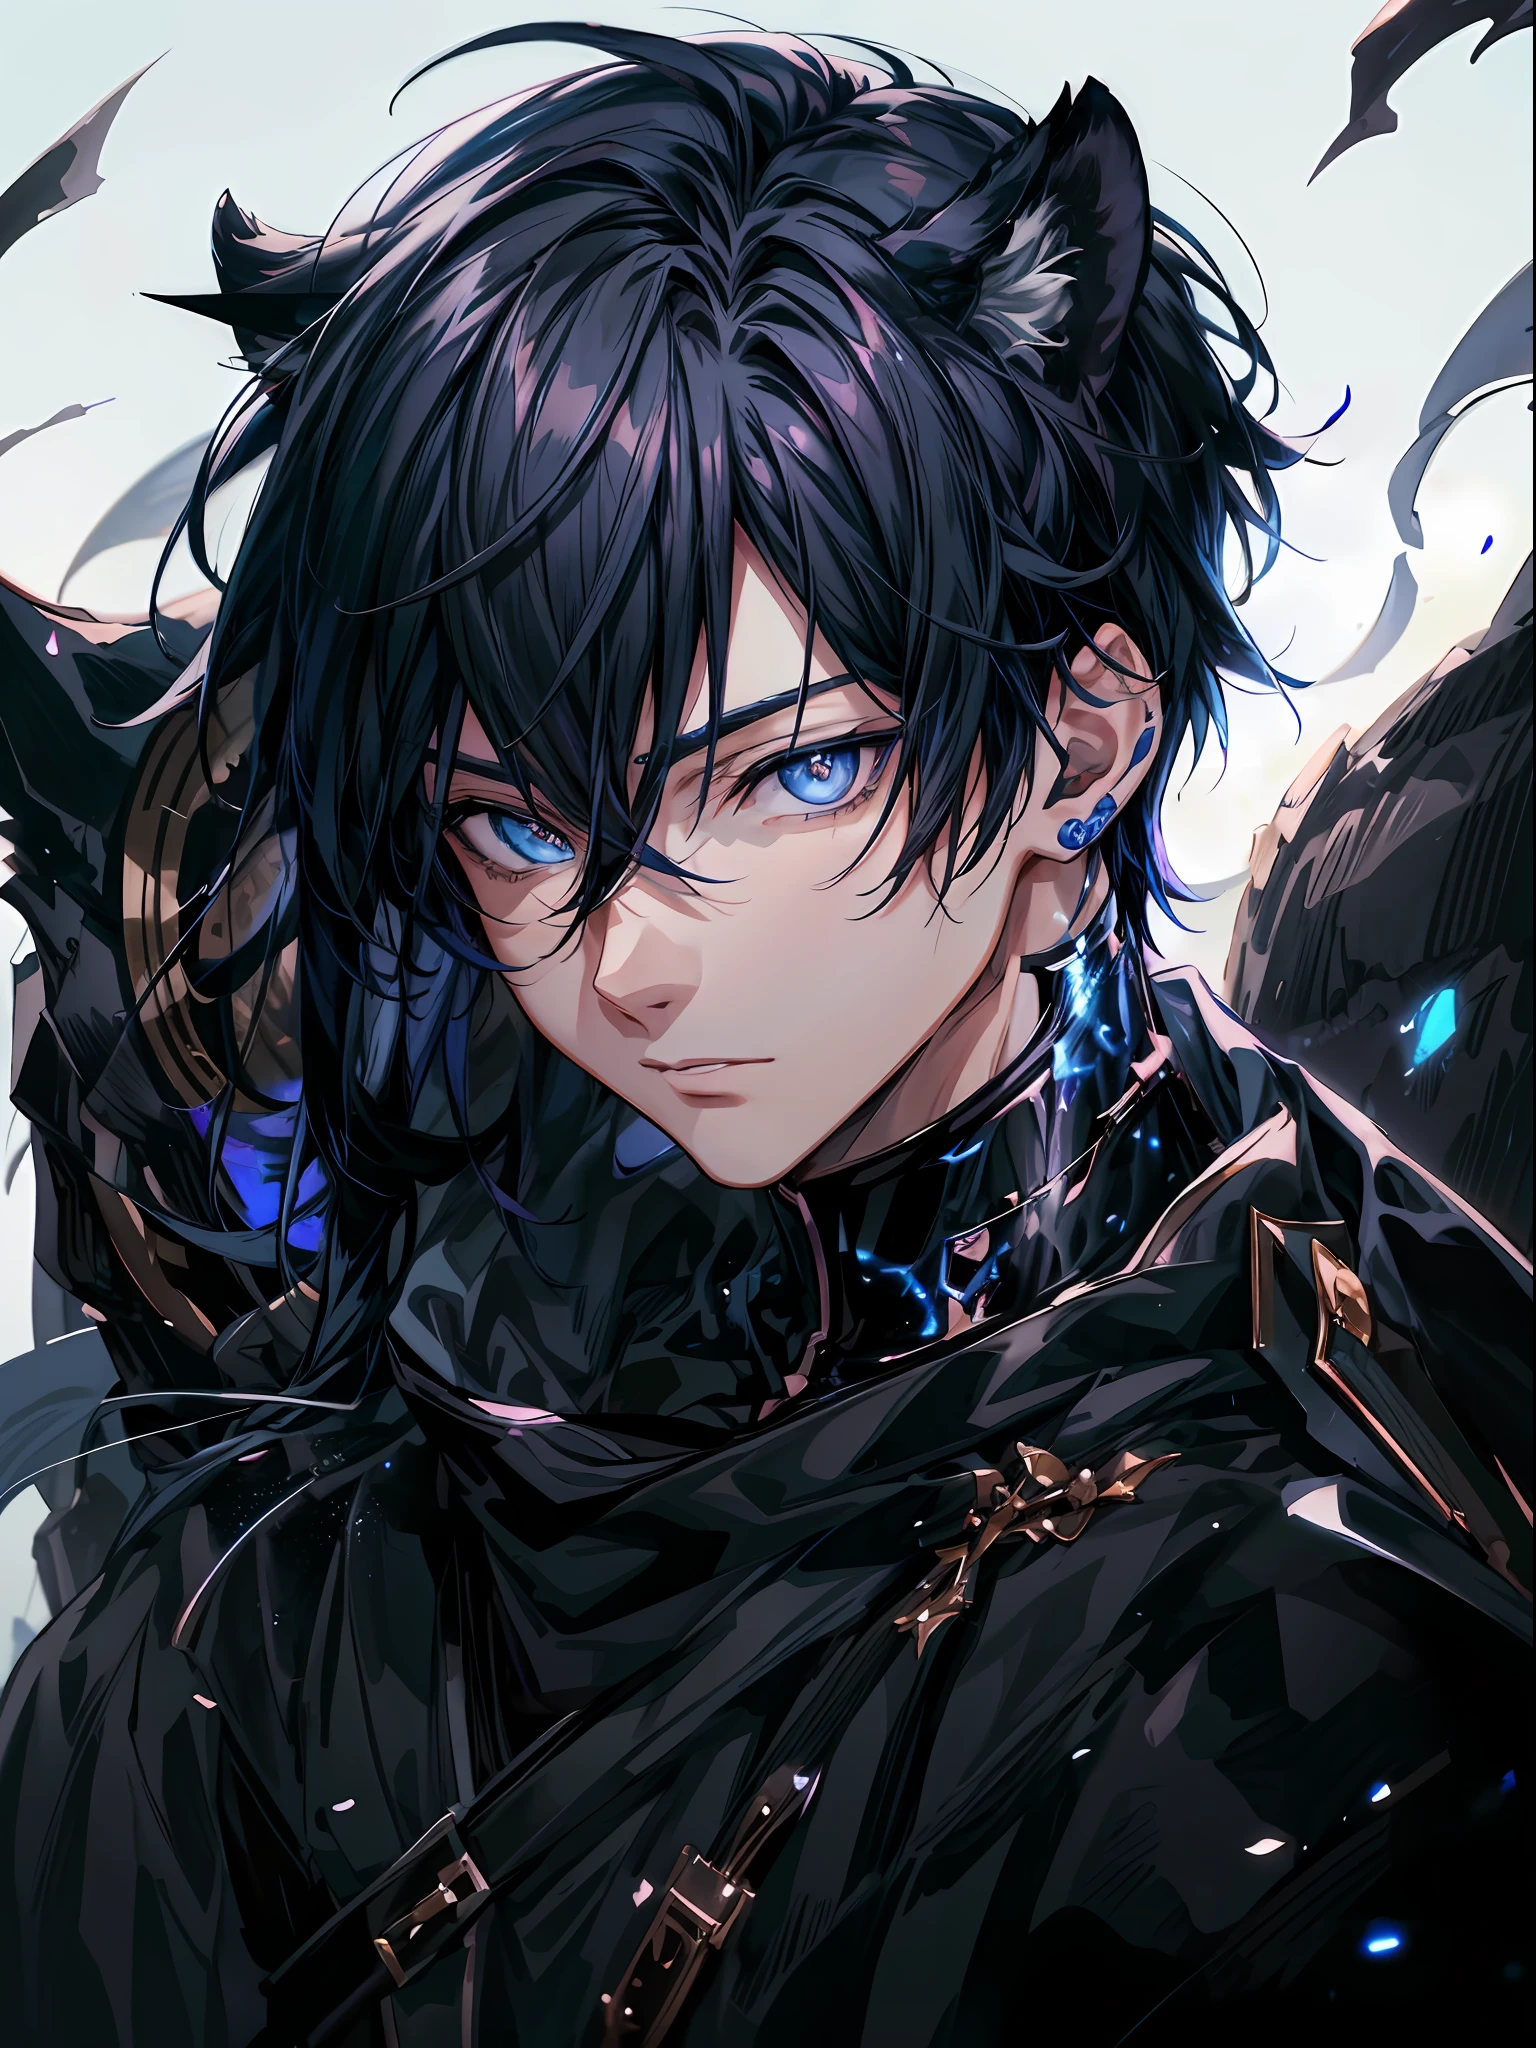 anime boy with blue eyes and black hair with a tiger, tall anime guy with blue eyes, handsome guy in demon slayer art, anime boy, male anime style, male anime character, detailed digital anime art, stunning anime face portrait, epic anime style, digital anime illustration, 4k anime wallpaper, anime wallaper, detailed anime character art, beautiful androgynous prince